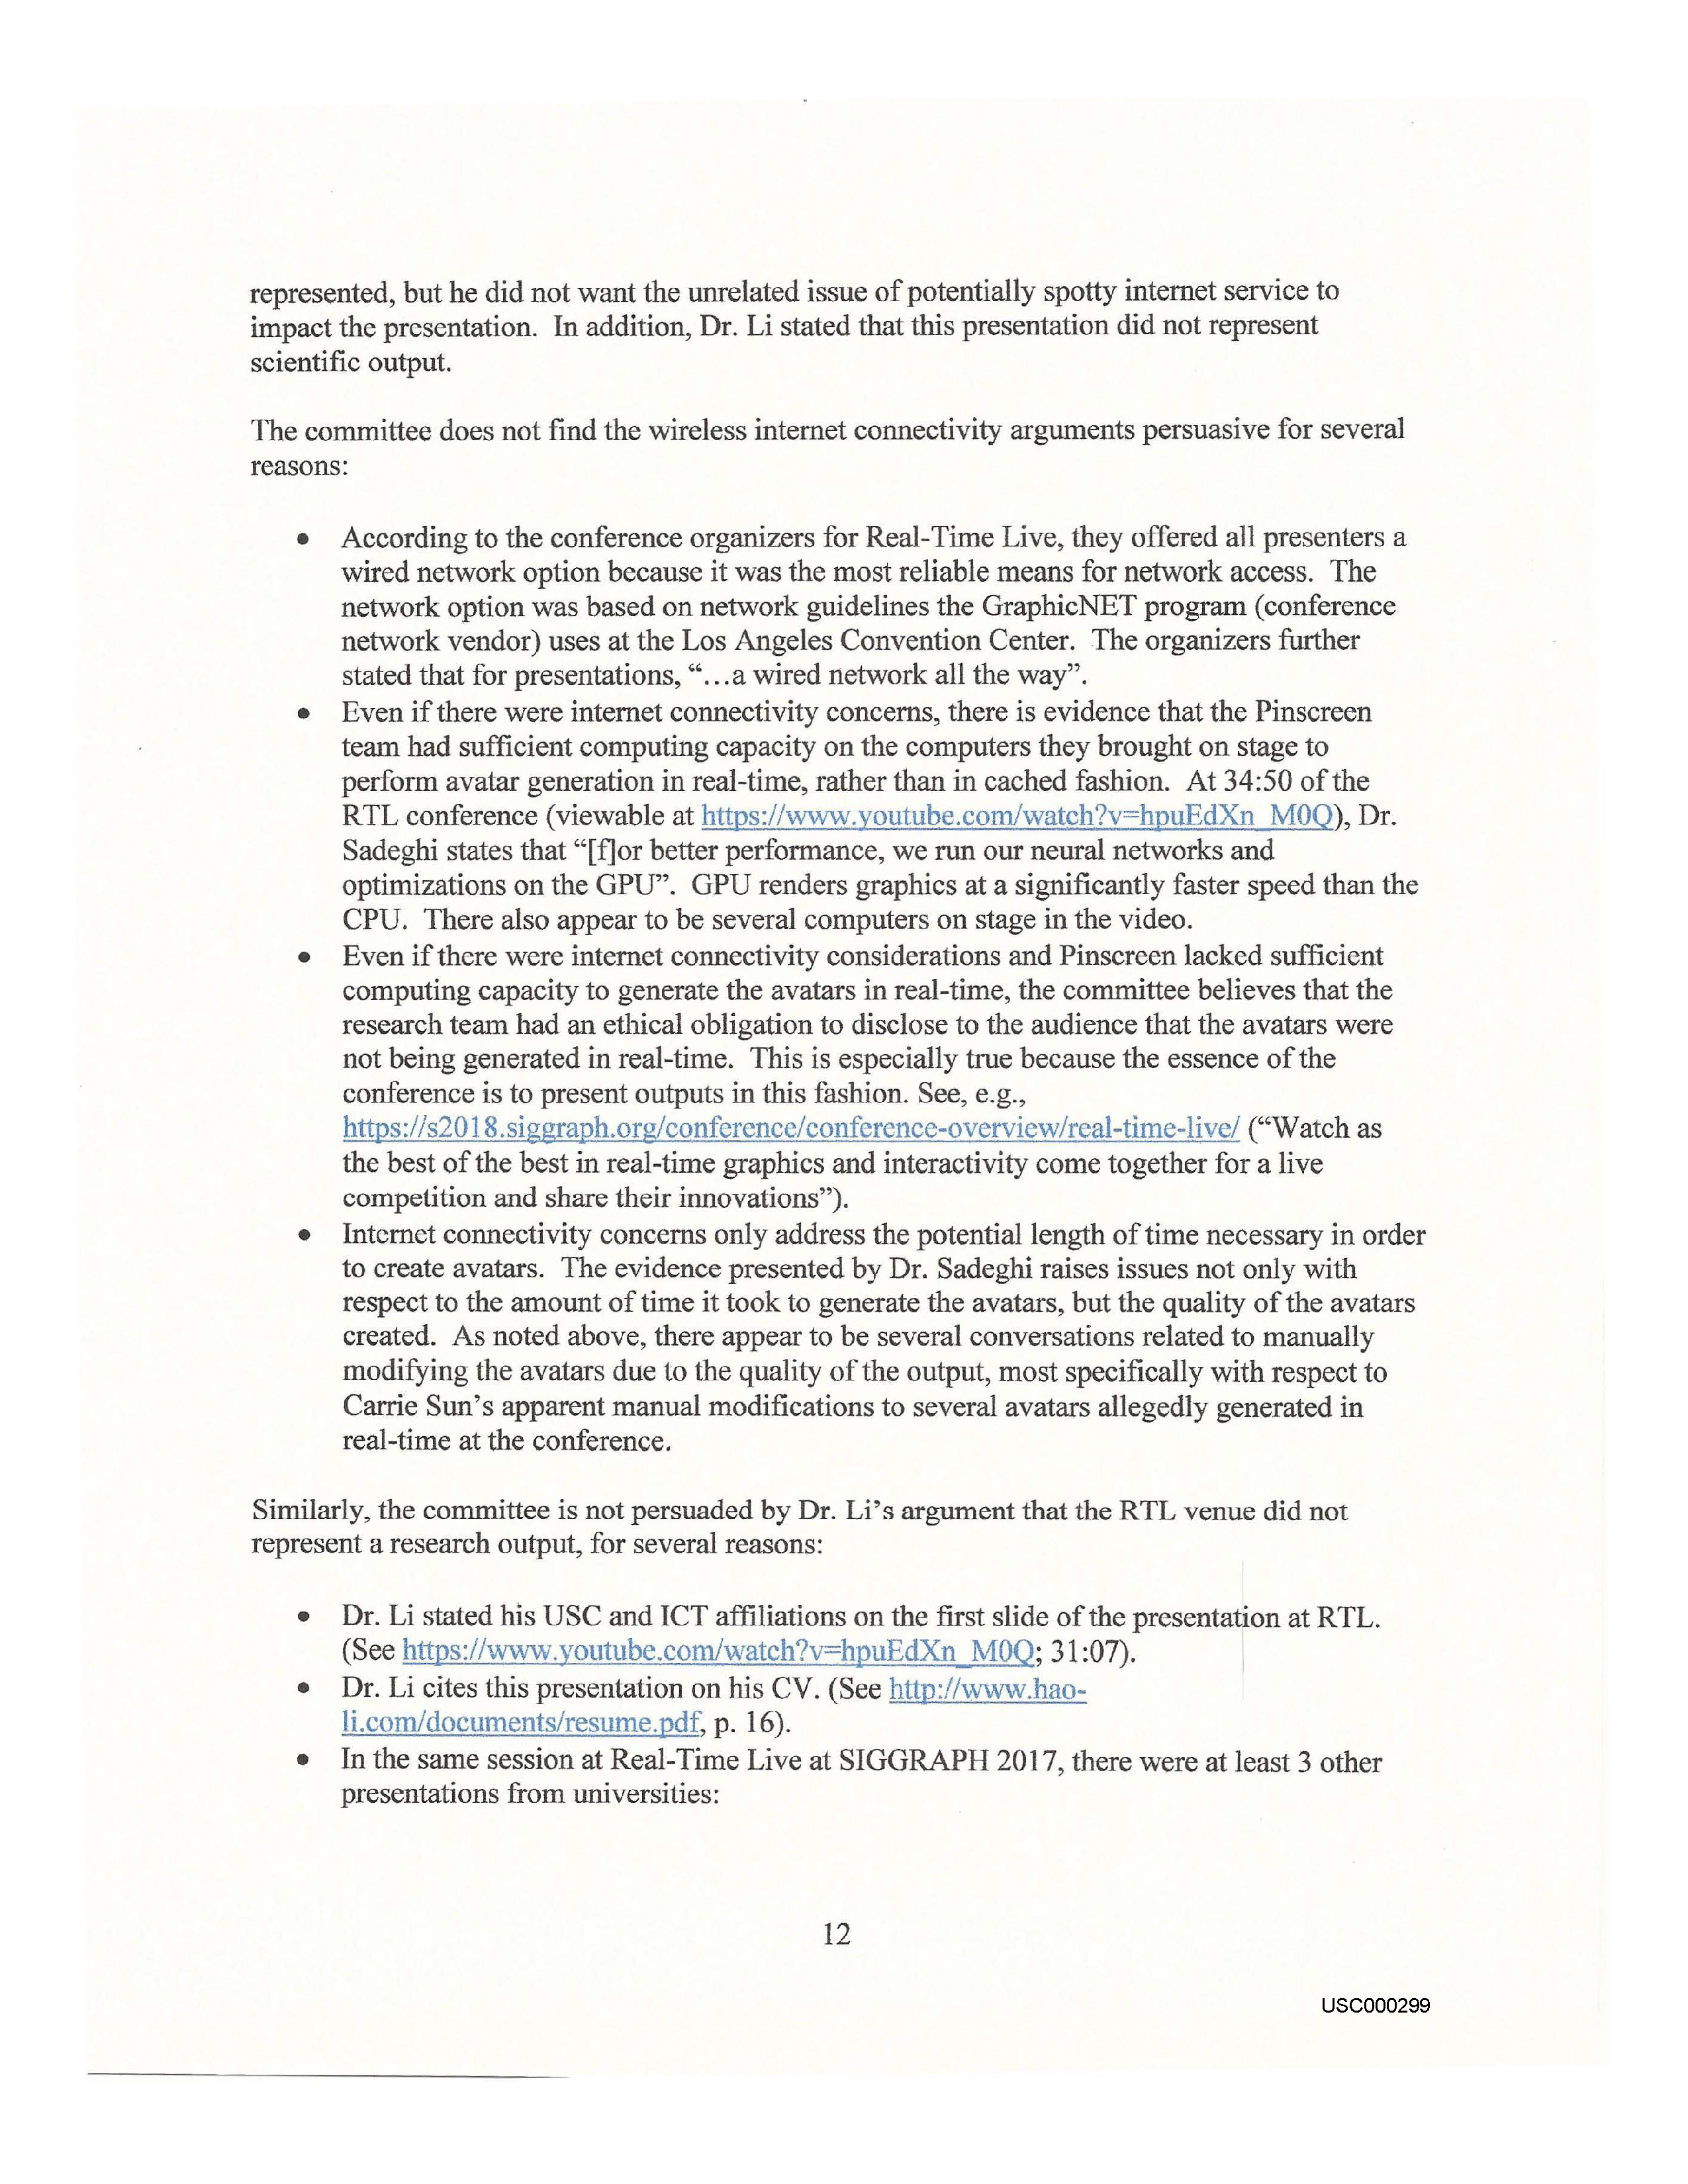 USC's Investigation Report re Hao Li's and Pinscreen's Scientific Misconduct at ACM SIGGRAPH RTL 2017 [Summary] Page 29